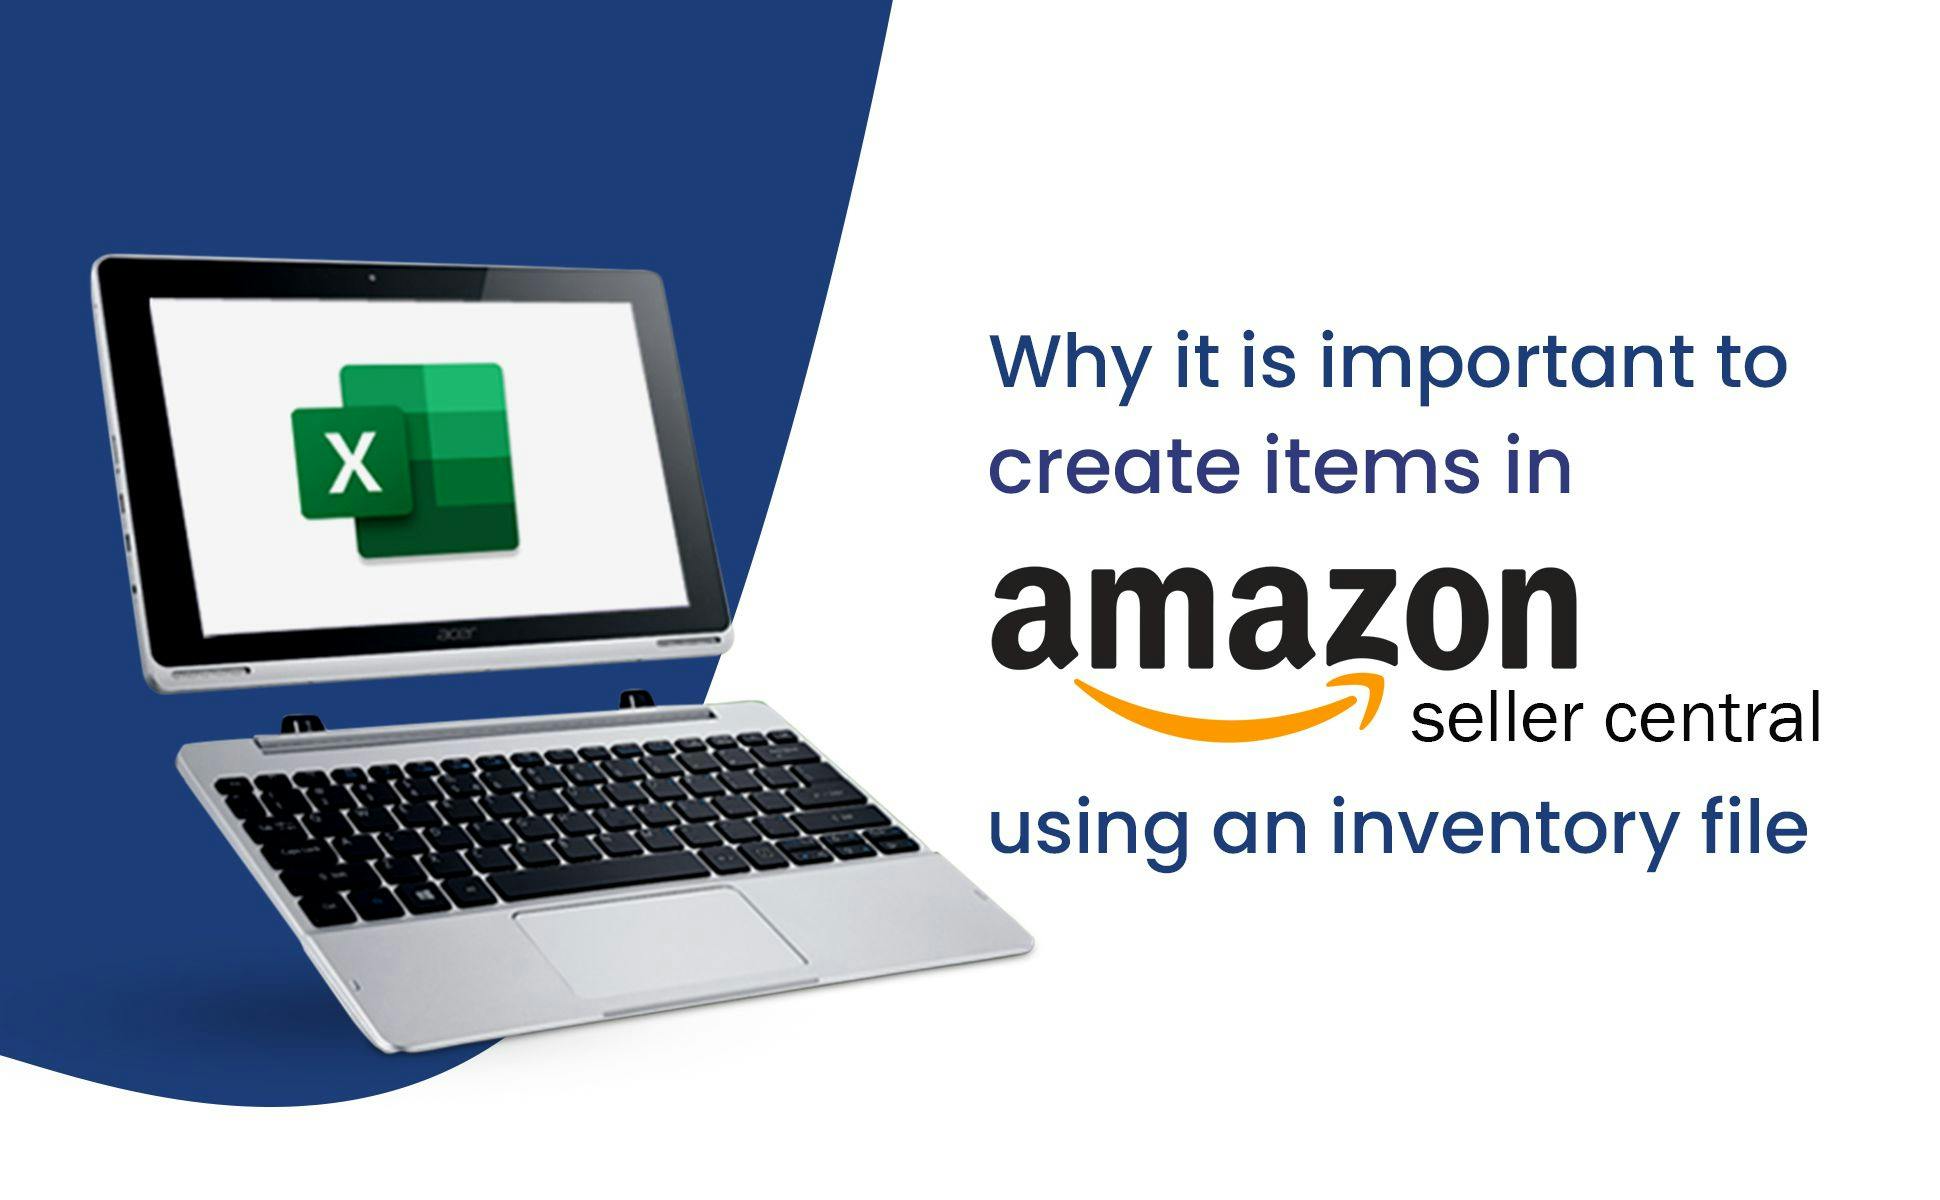 creating items in Amazon seller central using inventory file